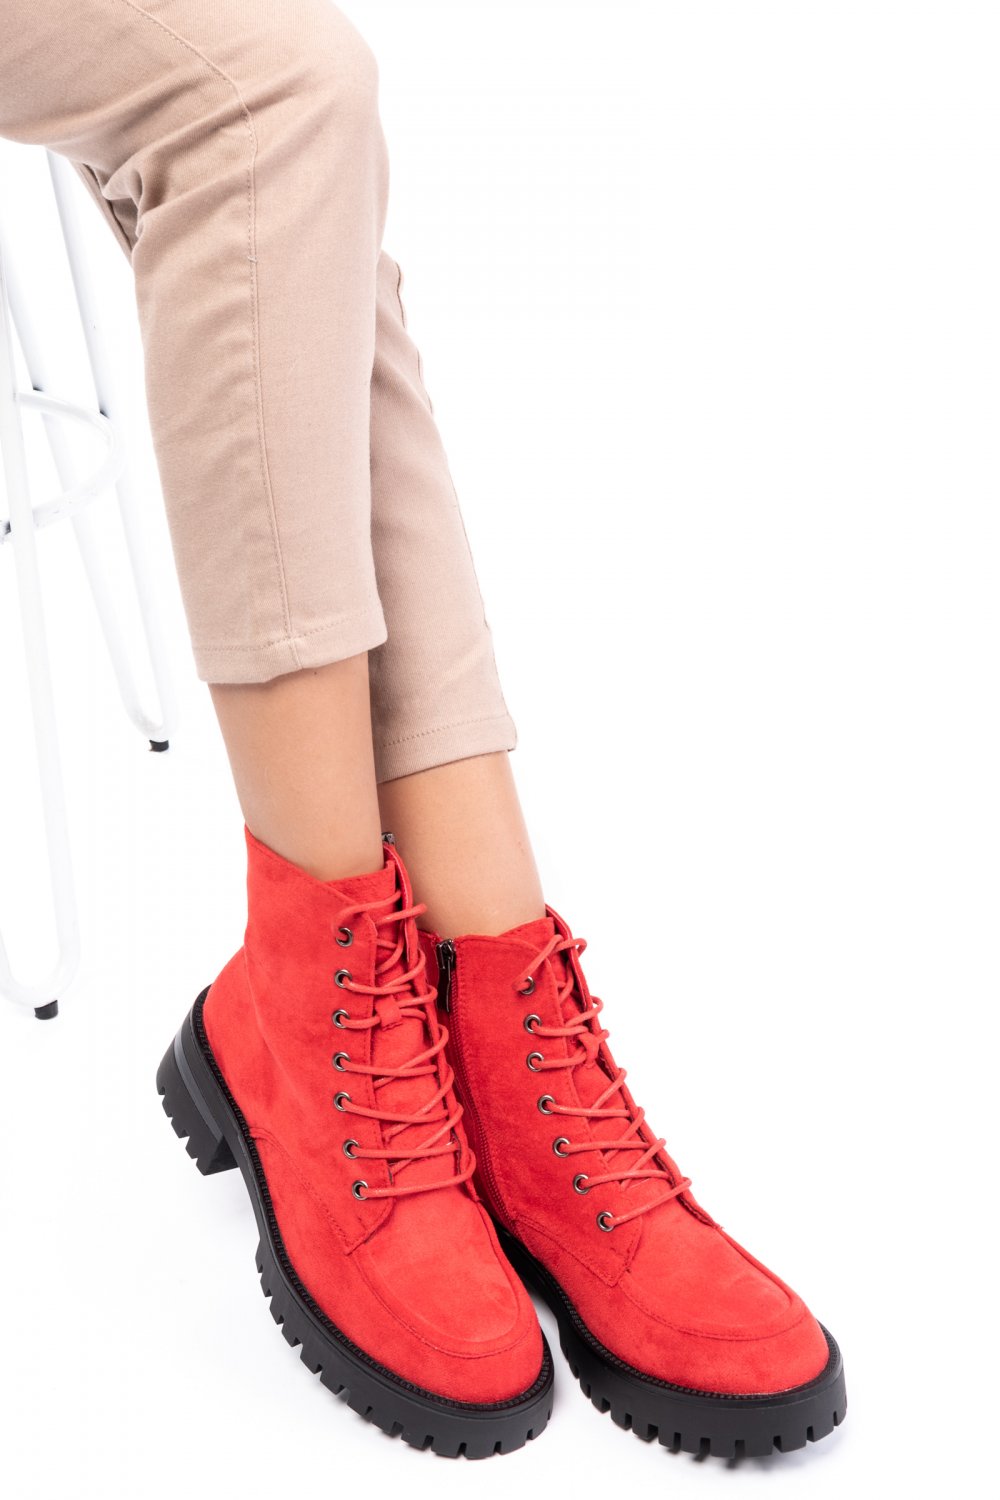 GHETE RED SUEDE FSPBW031